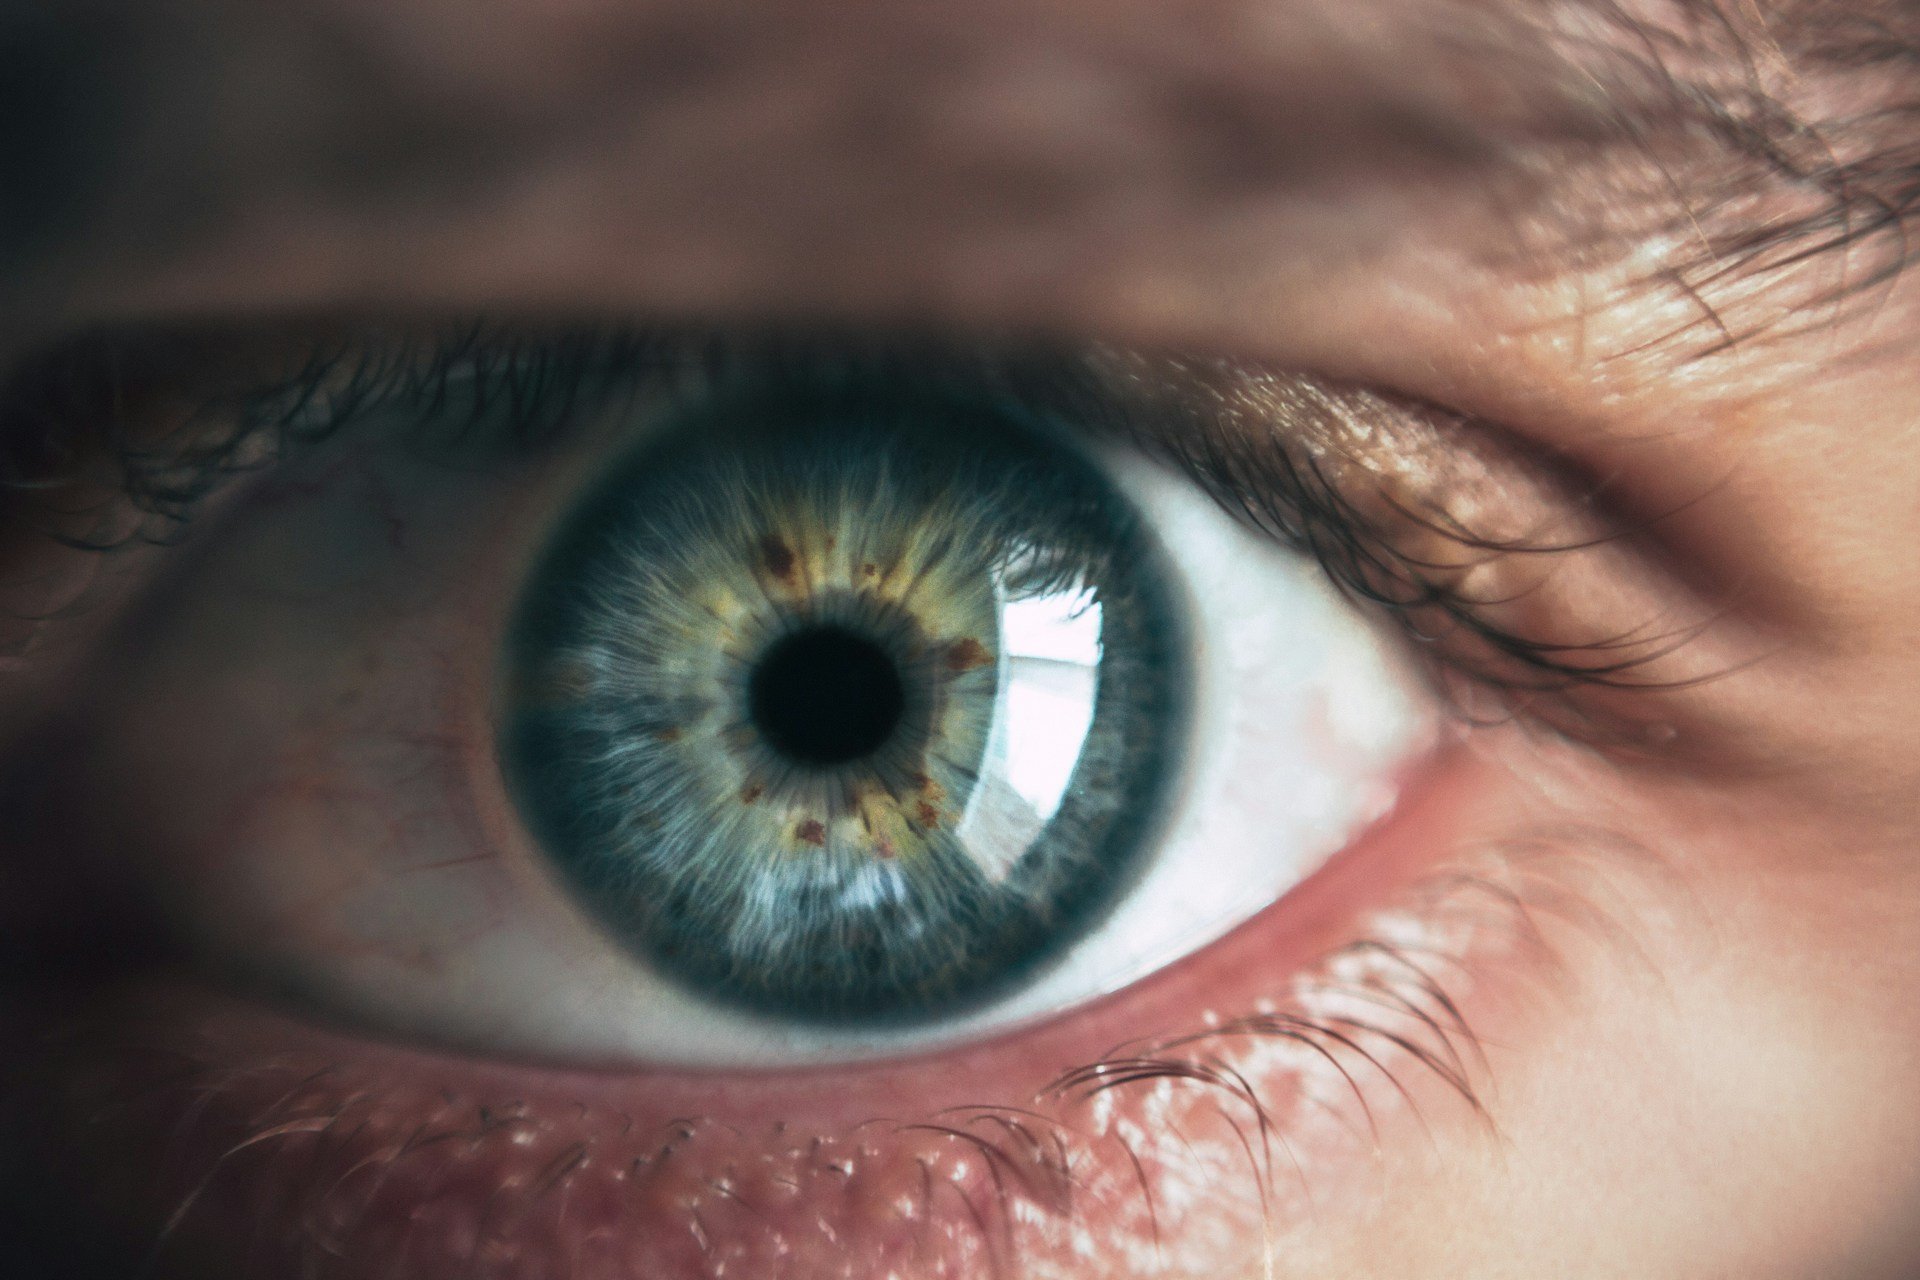 Spain bans company that pays people to have irises scanned thumbnail